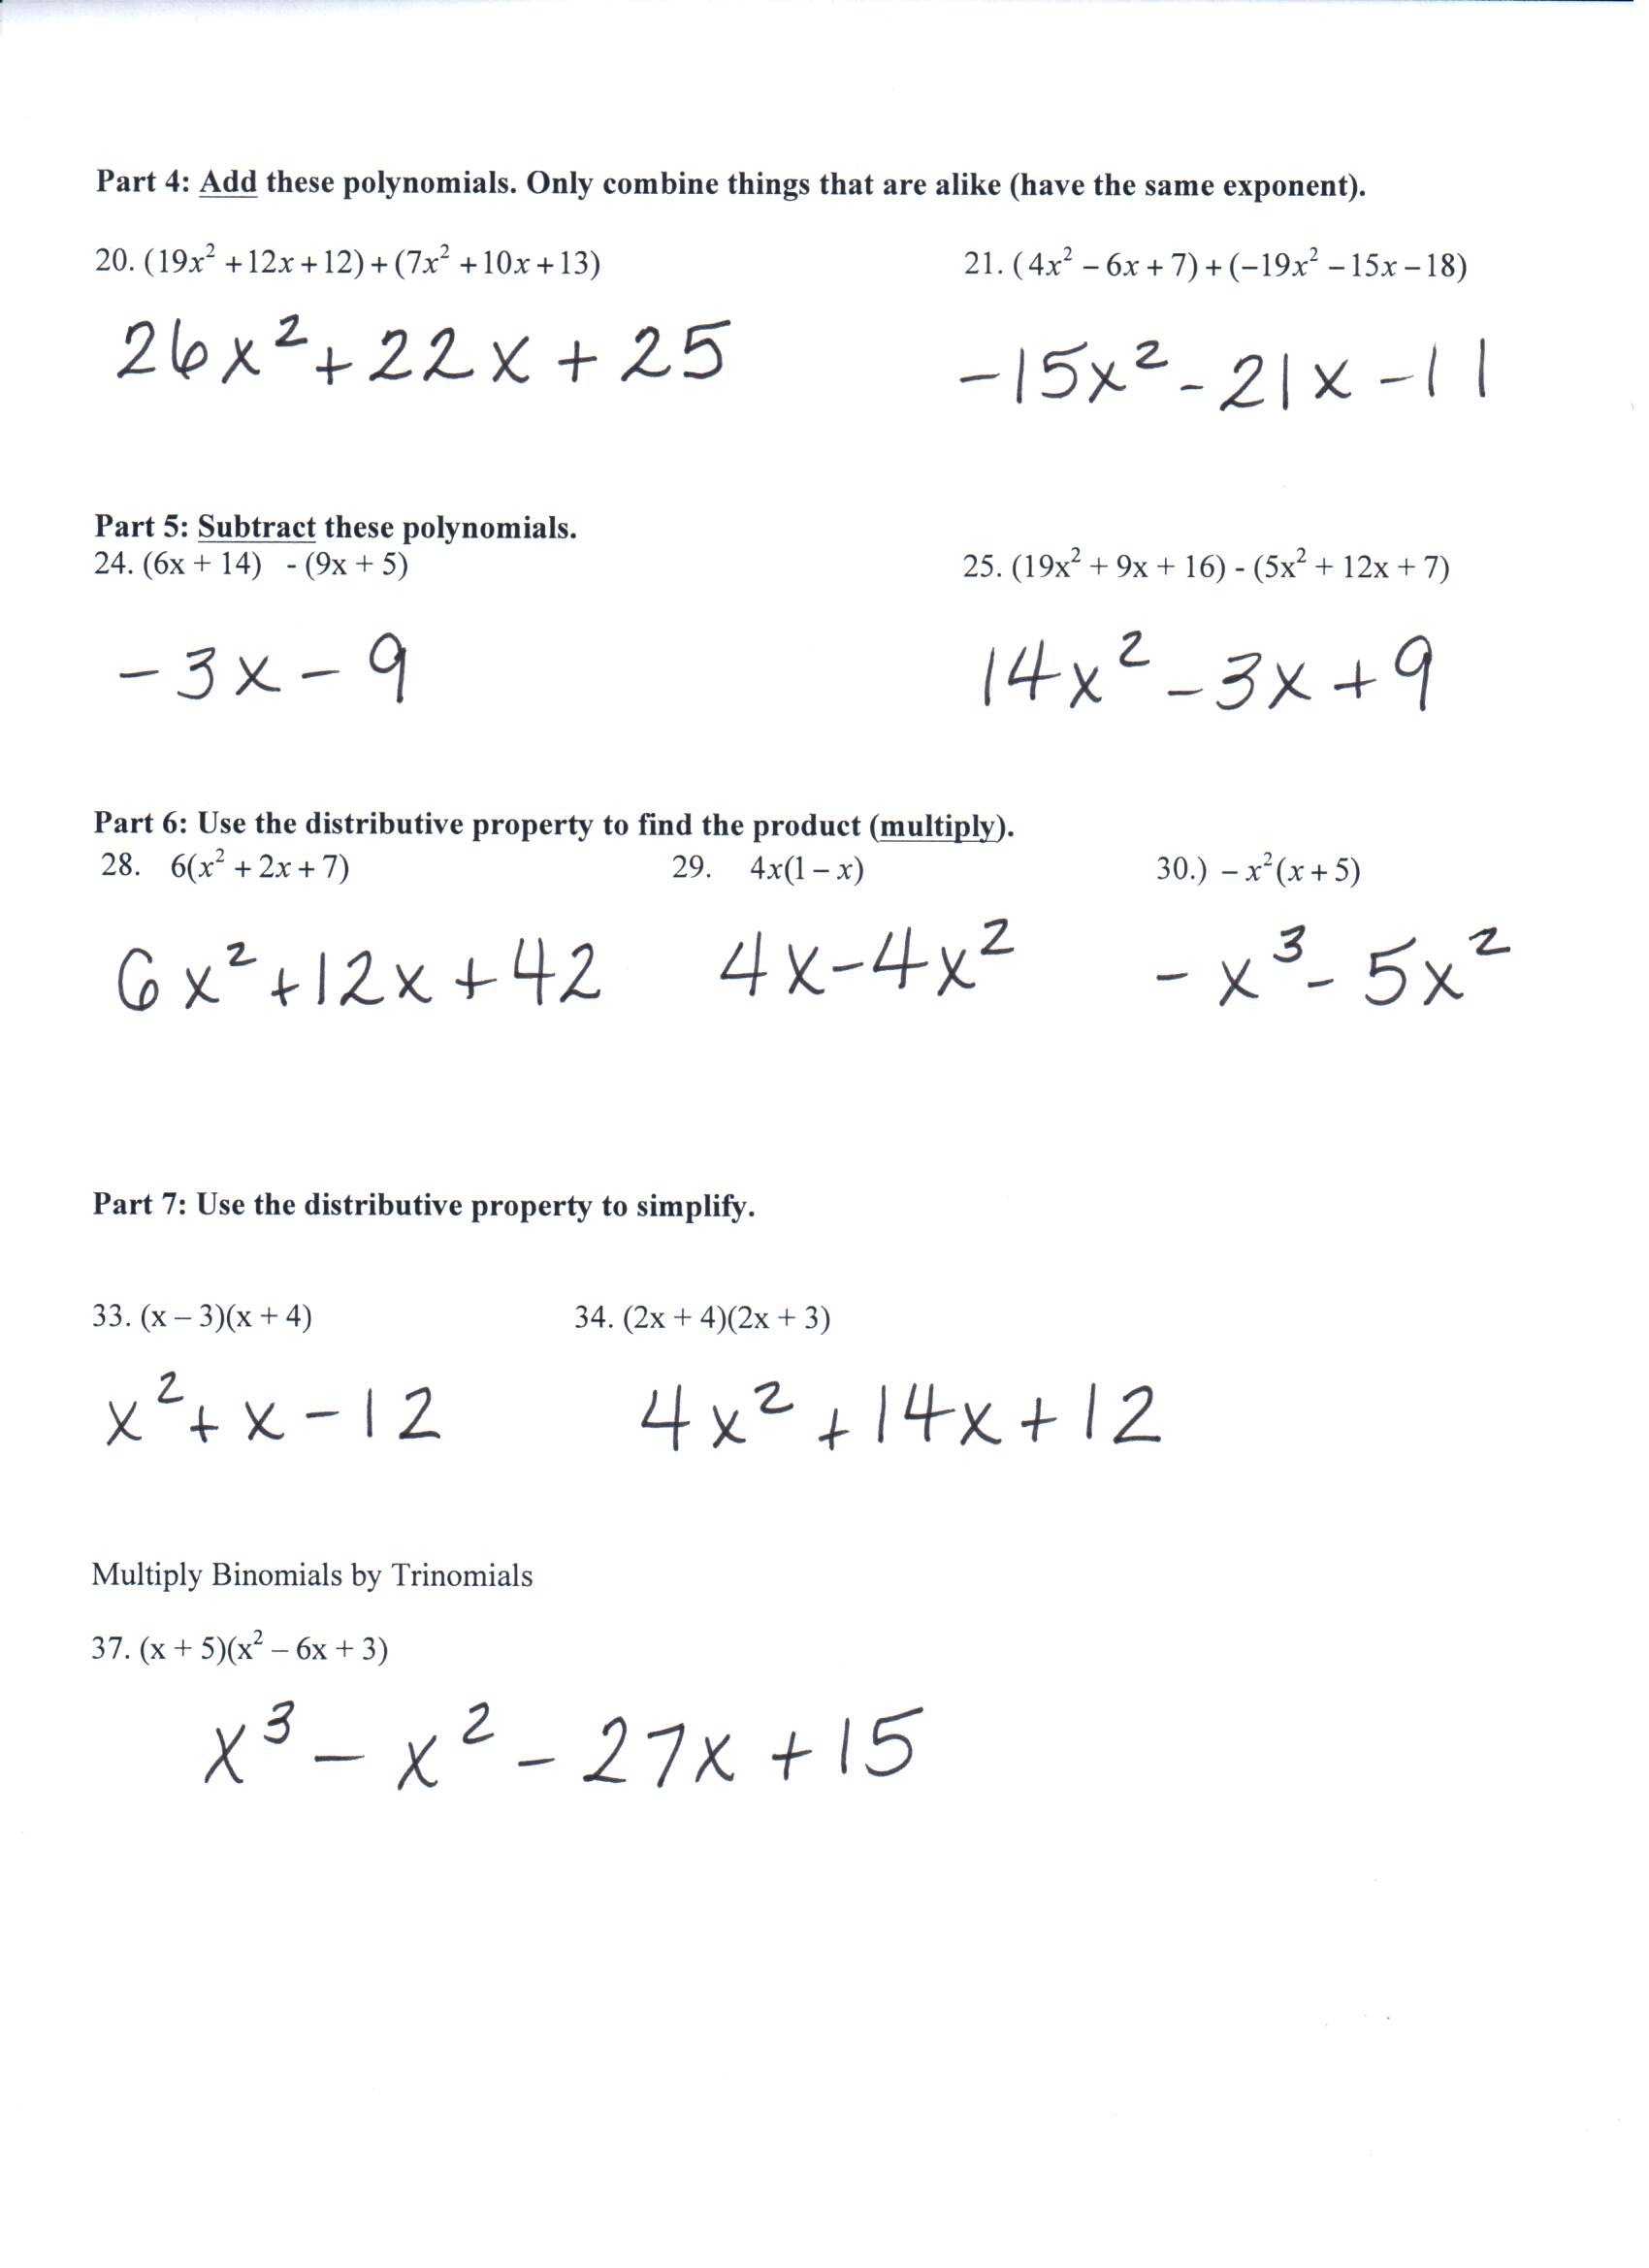 English to Metric Conversion Worksheet Along with Dimensional Analysis Math Worksheet Lovely Measurement Madness